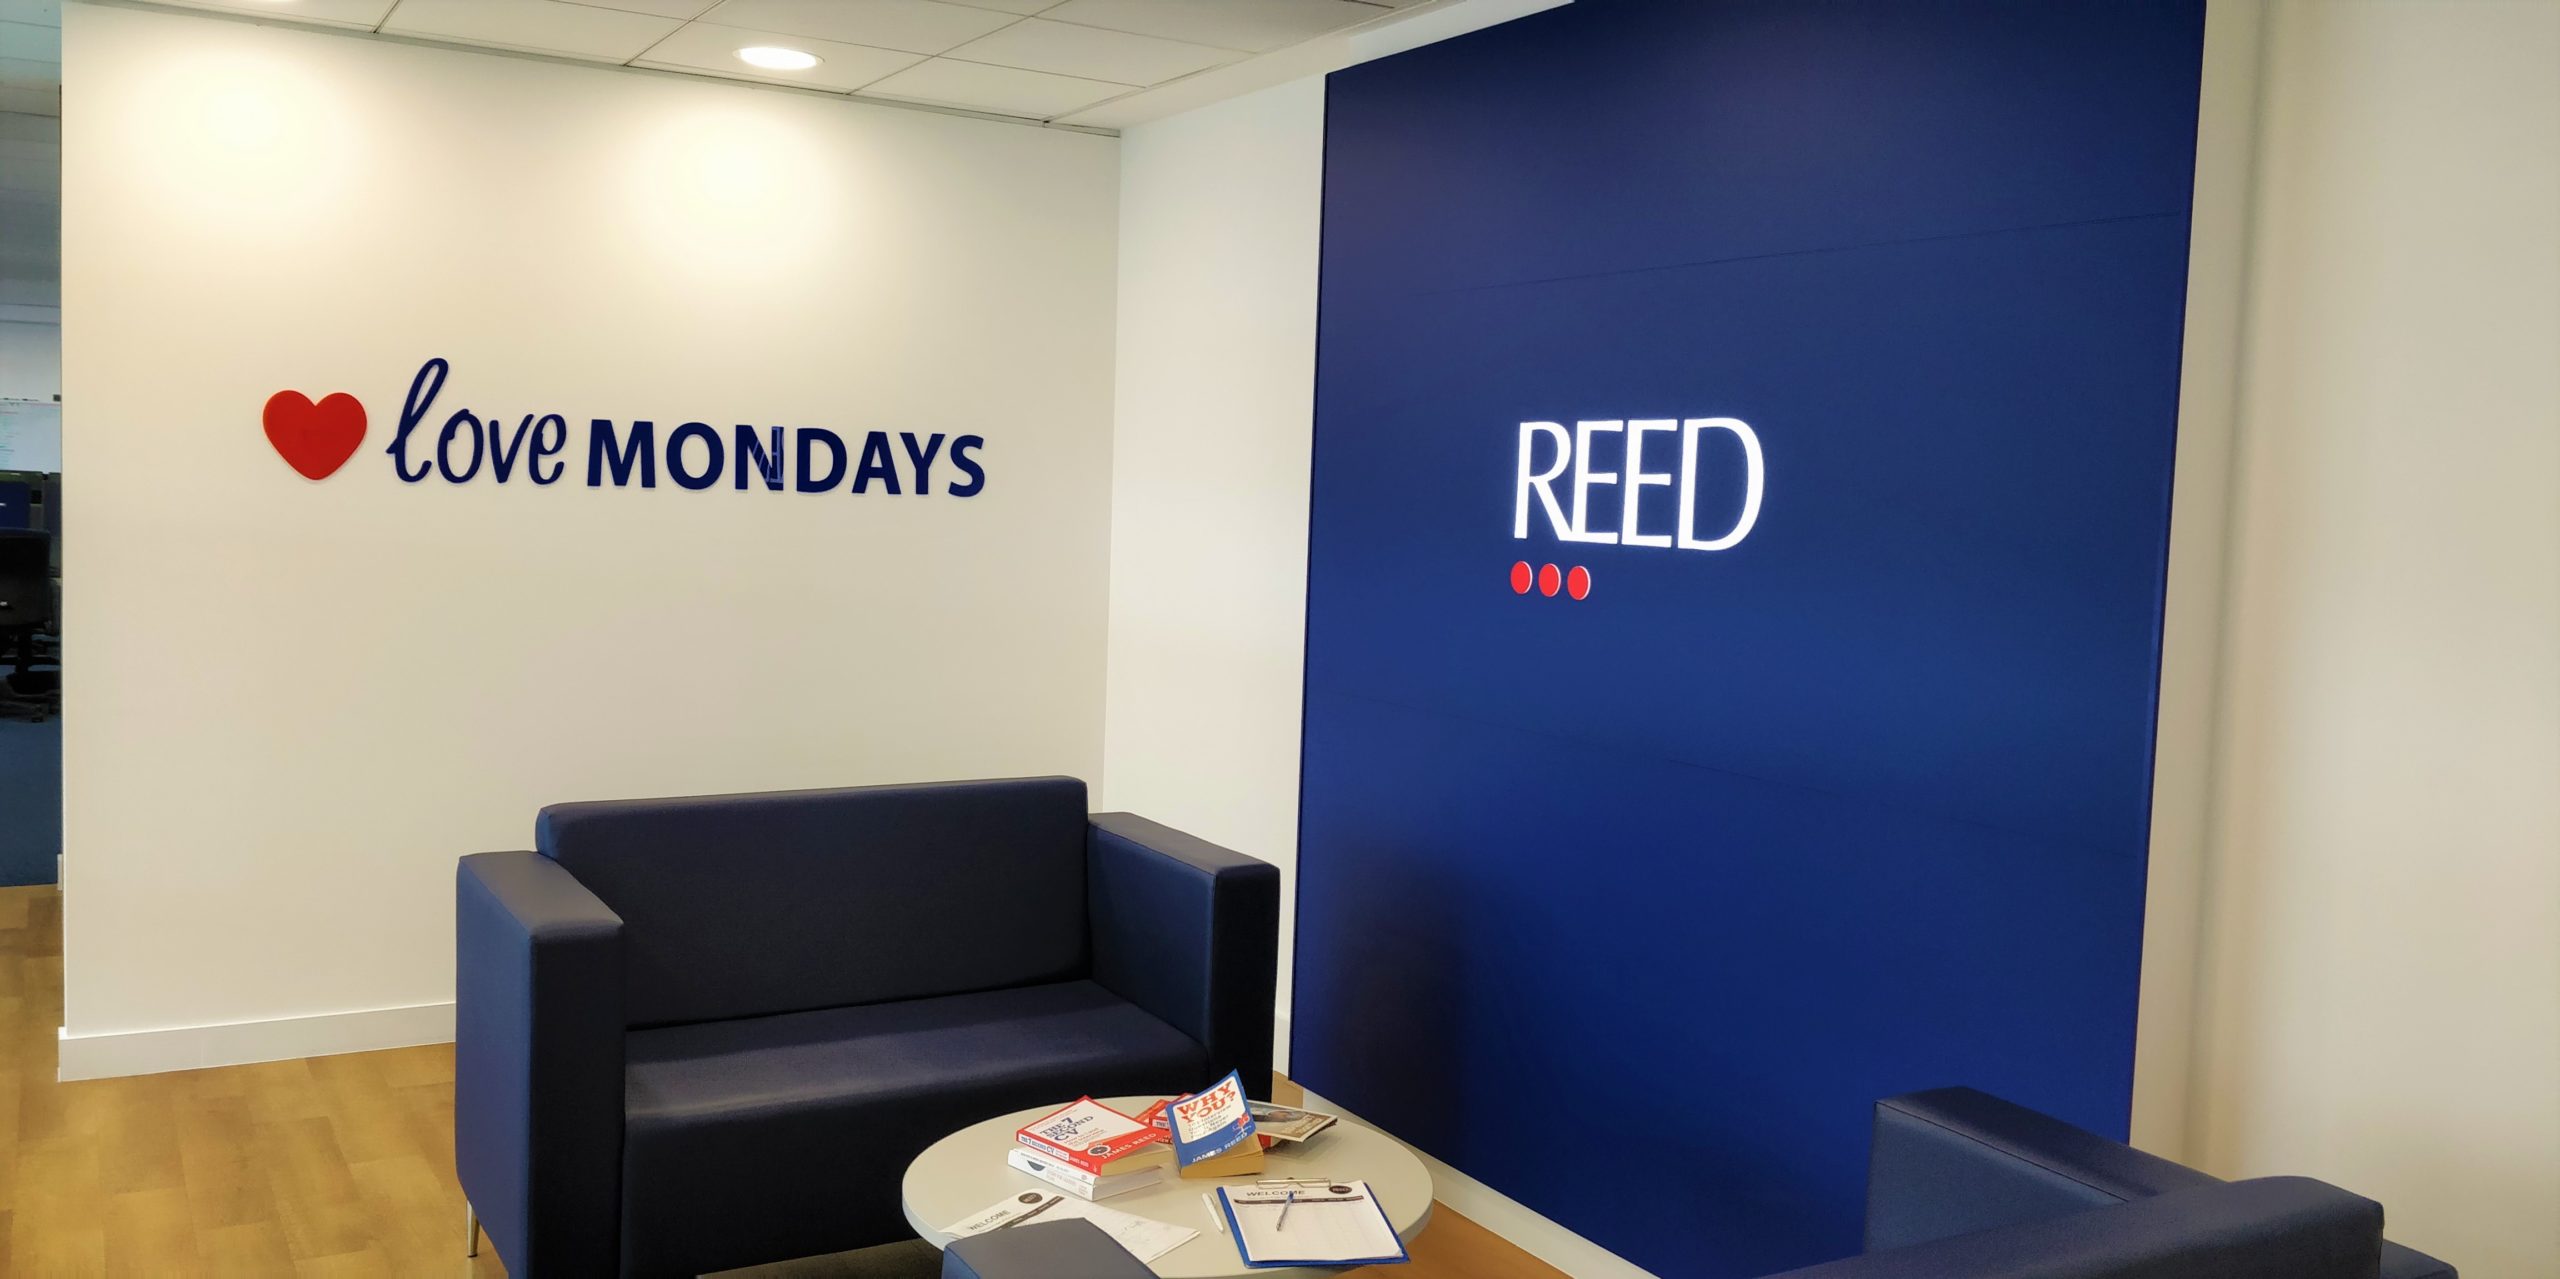 Reed Oxford reception area (present day)